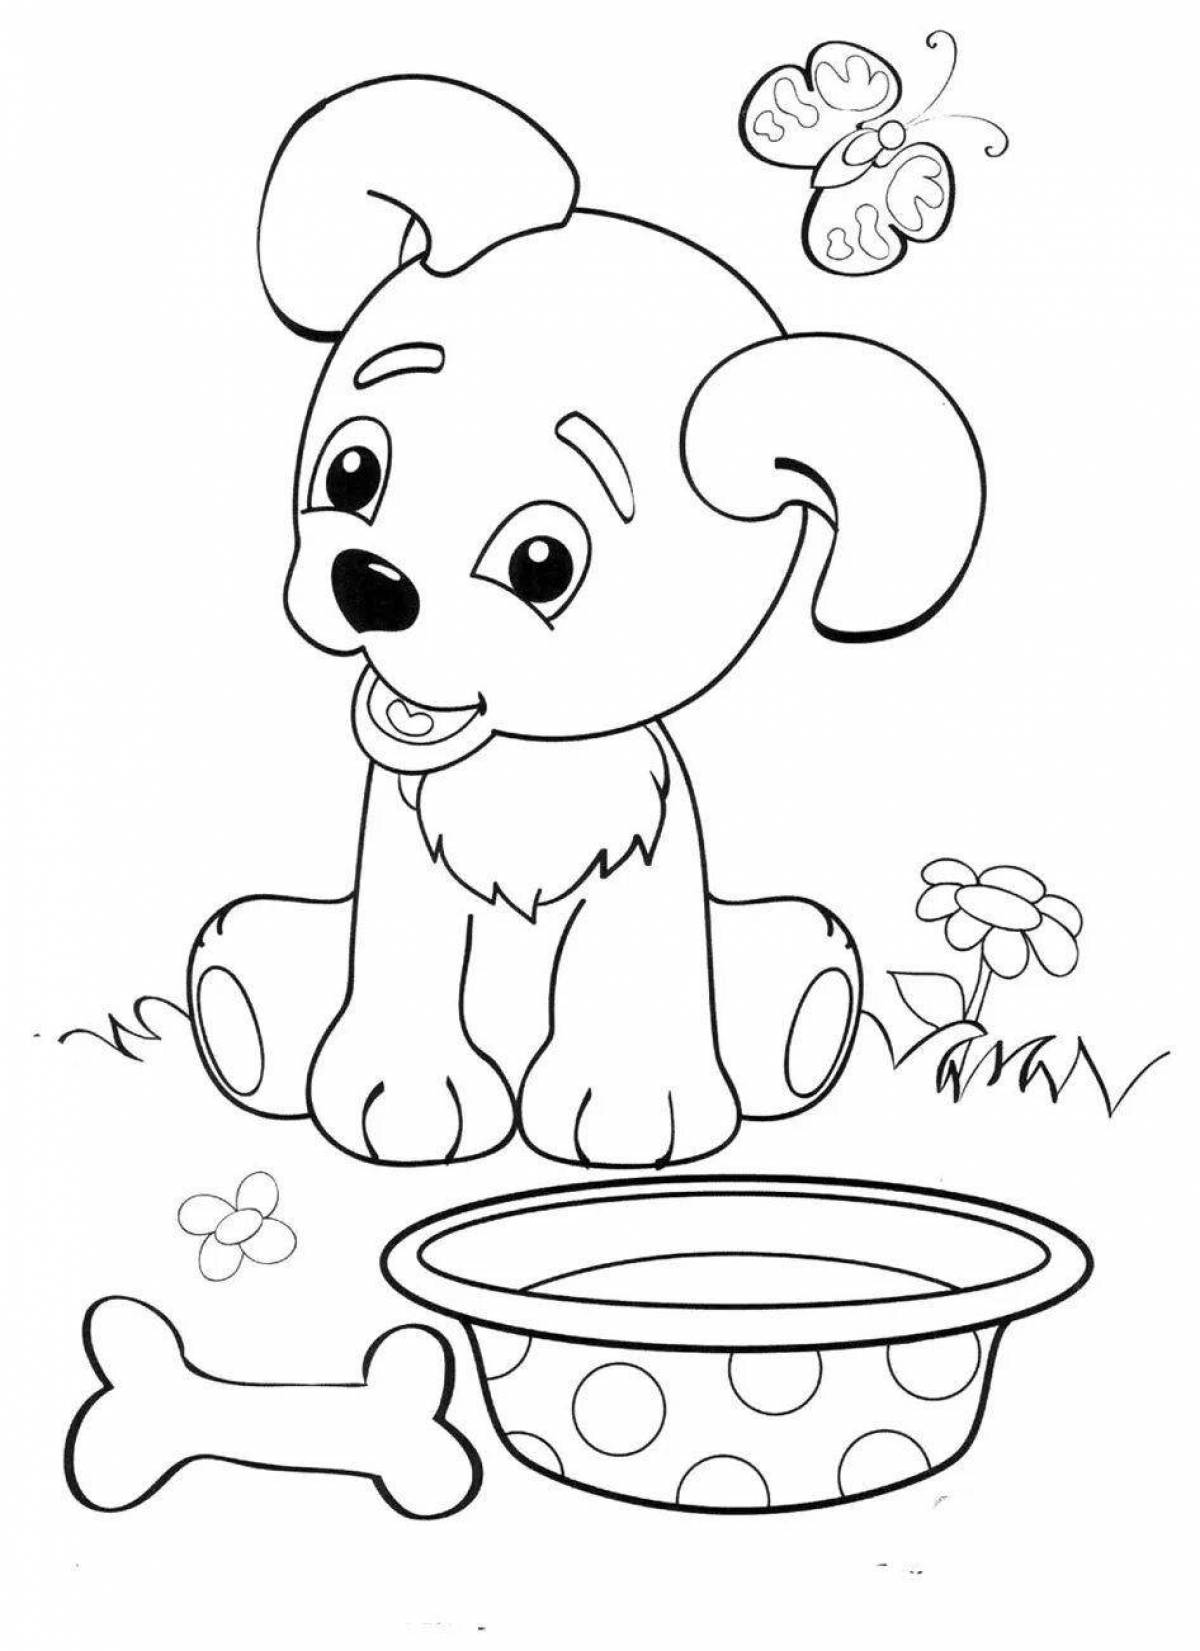 Coloring page smiling puppy